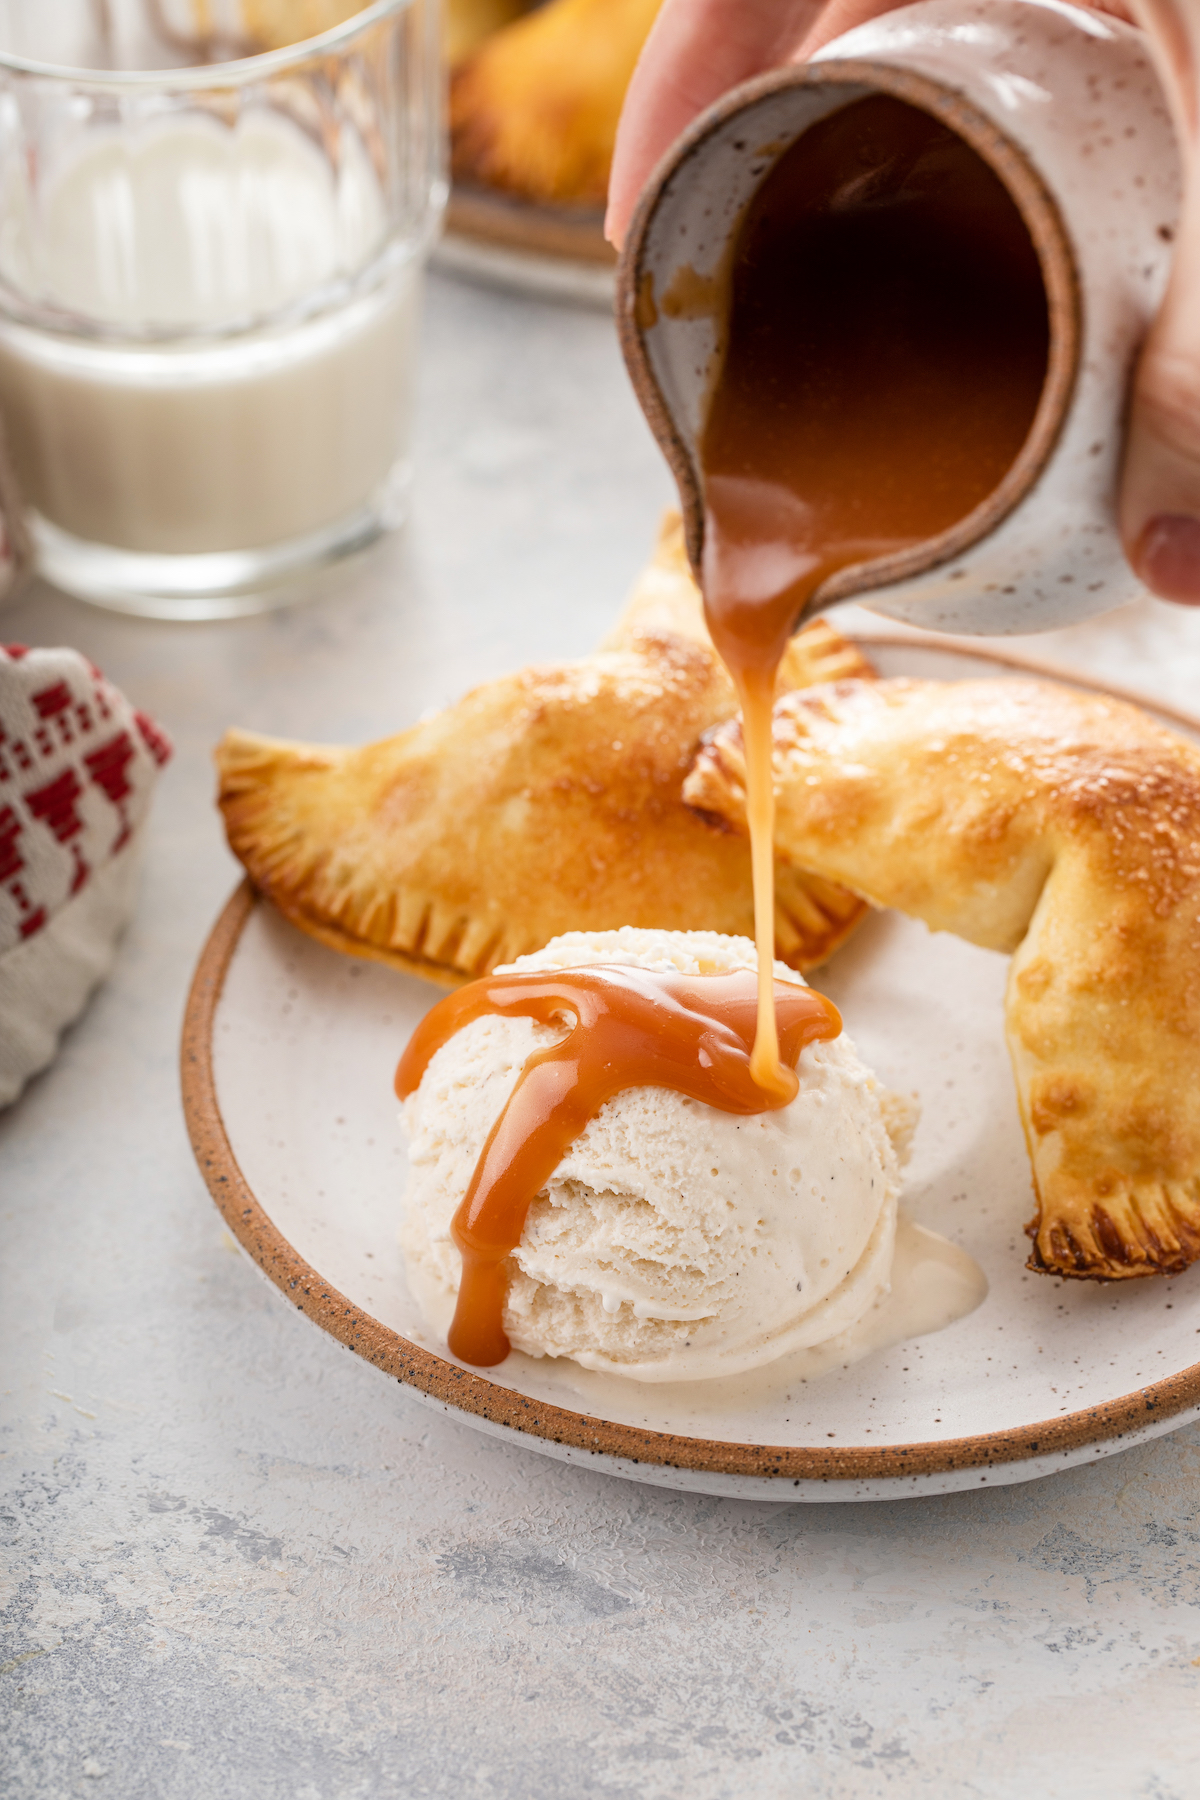 Two hand pies on a plate with a scoop of ice cream. Caramel sauce is being drizzled over the ice cream.